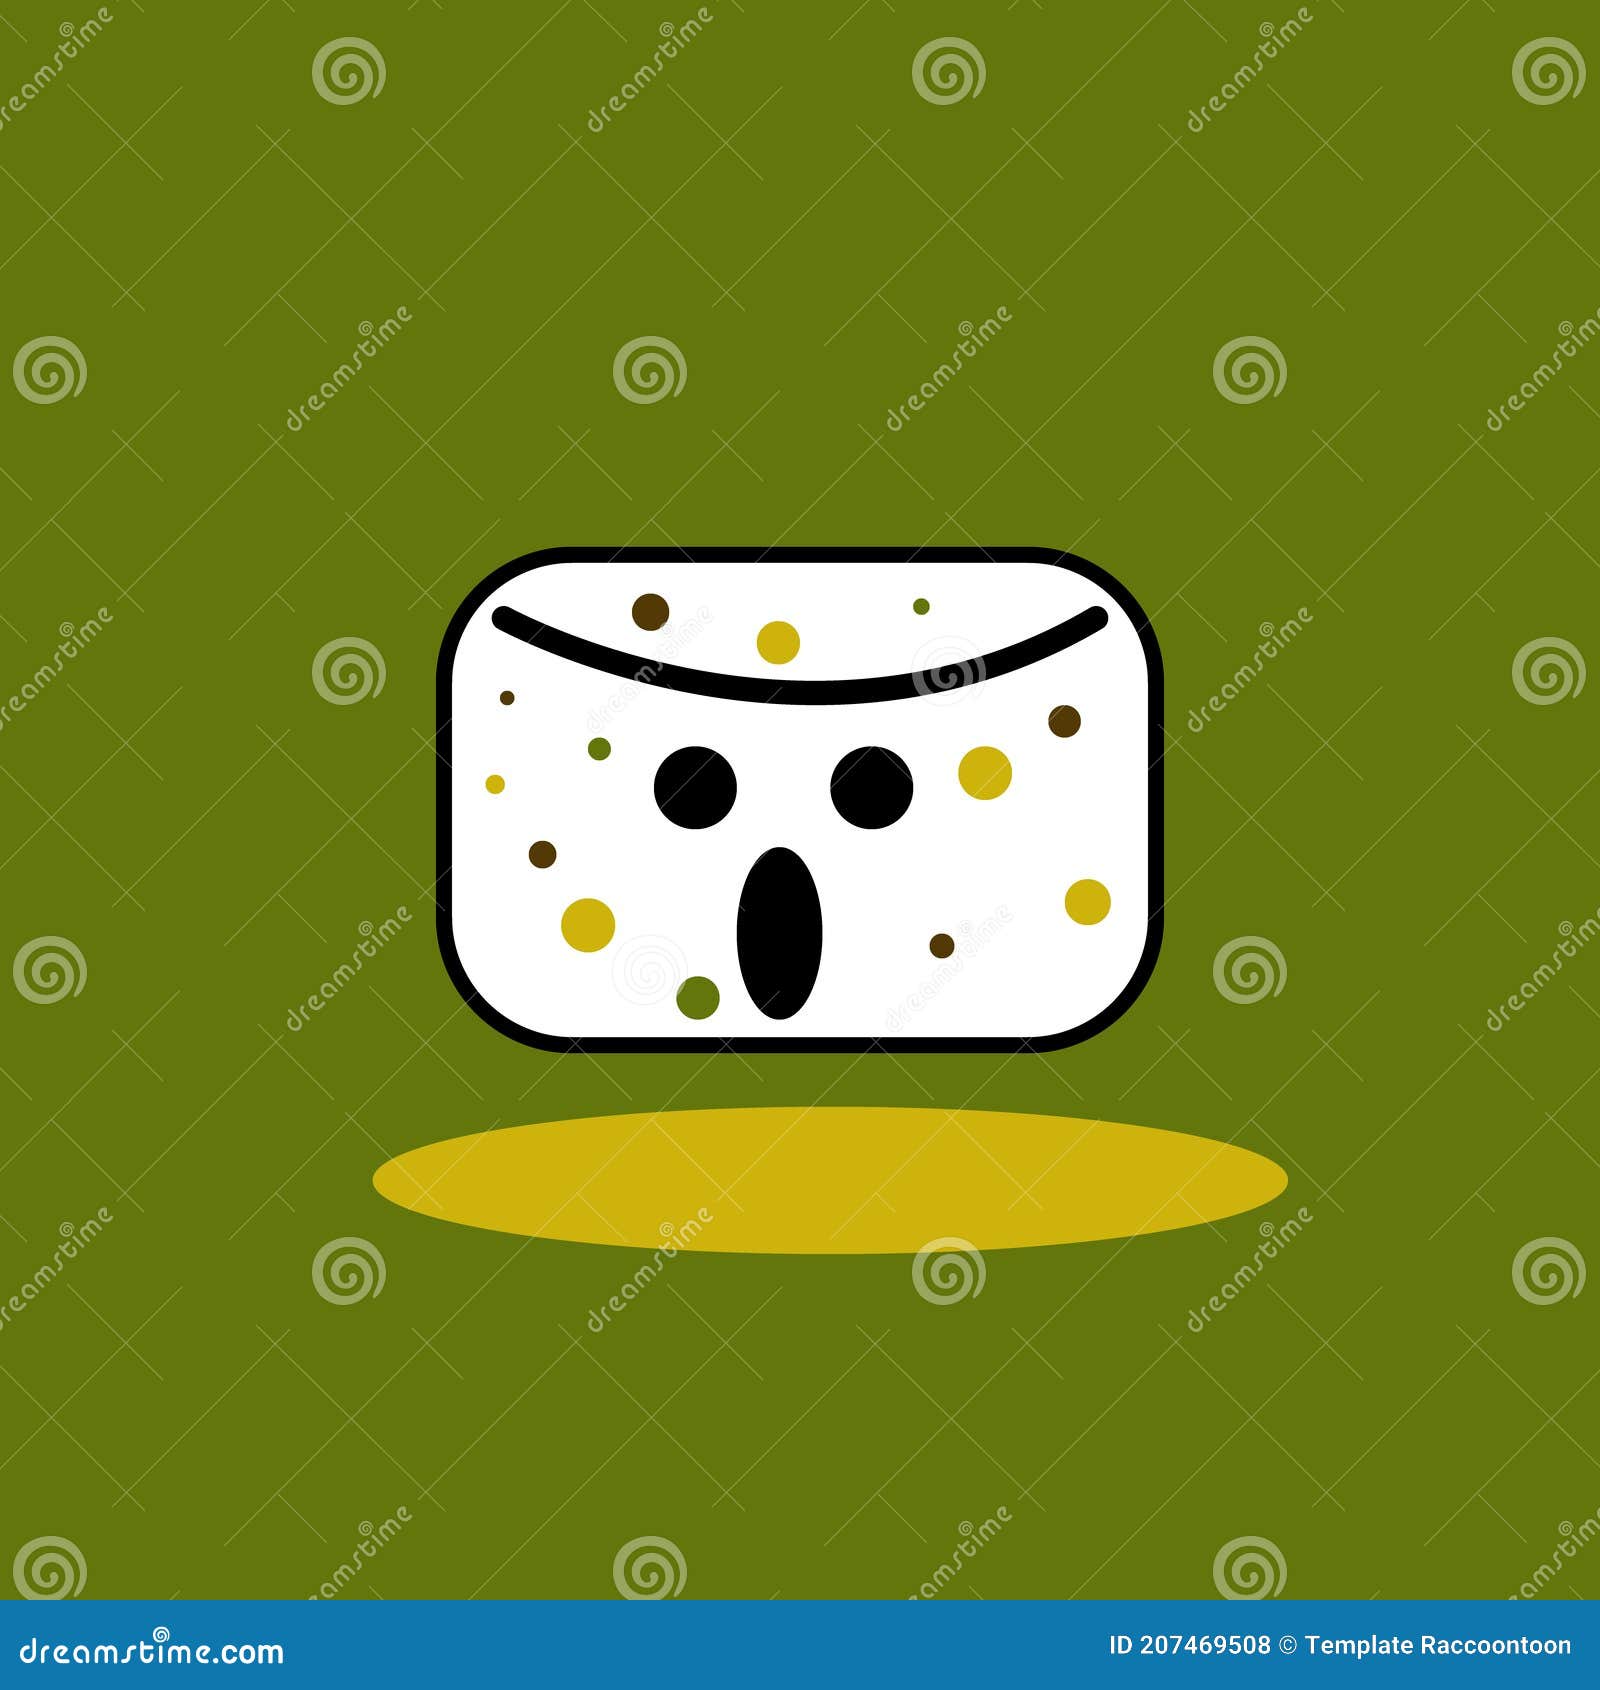 Ilustration Cartoon Grapich of Brown Marshmello Character Stock  Illustration - Illustration of marshmello, perfect: 207469508